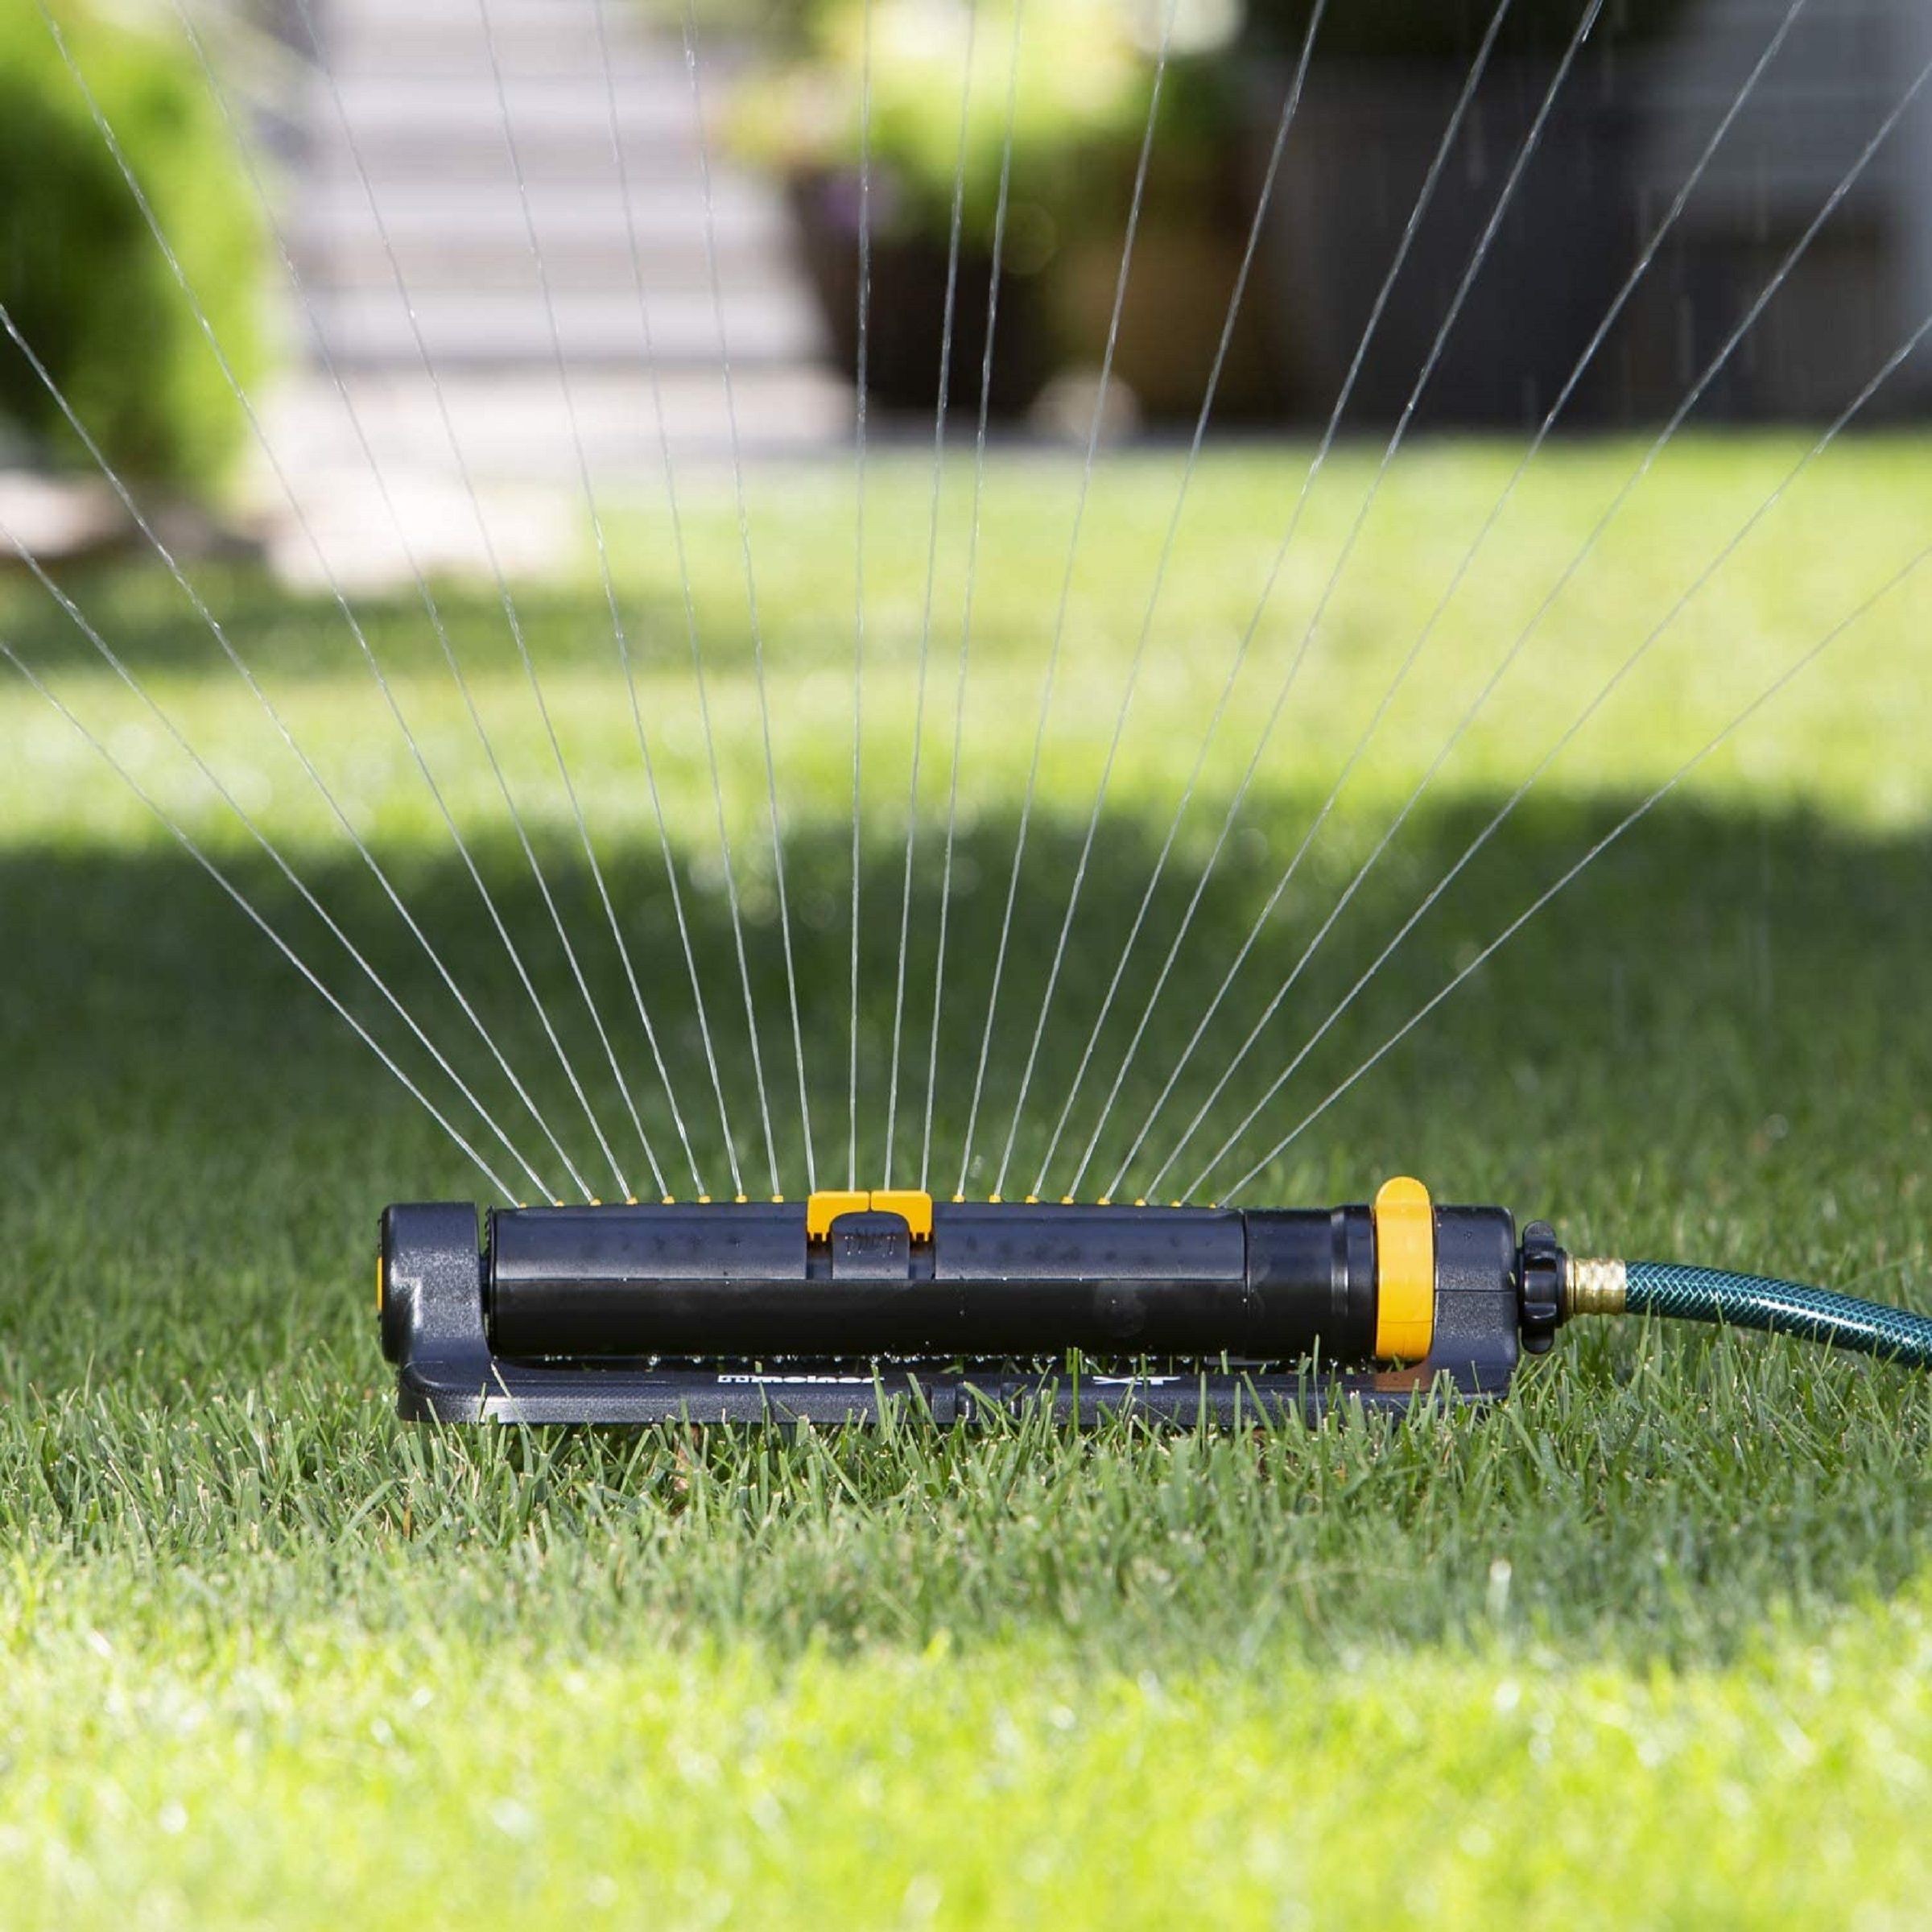 Lead lifestyle image for the best oscillating sprinklers guide.